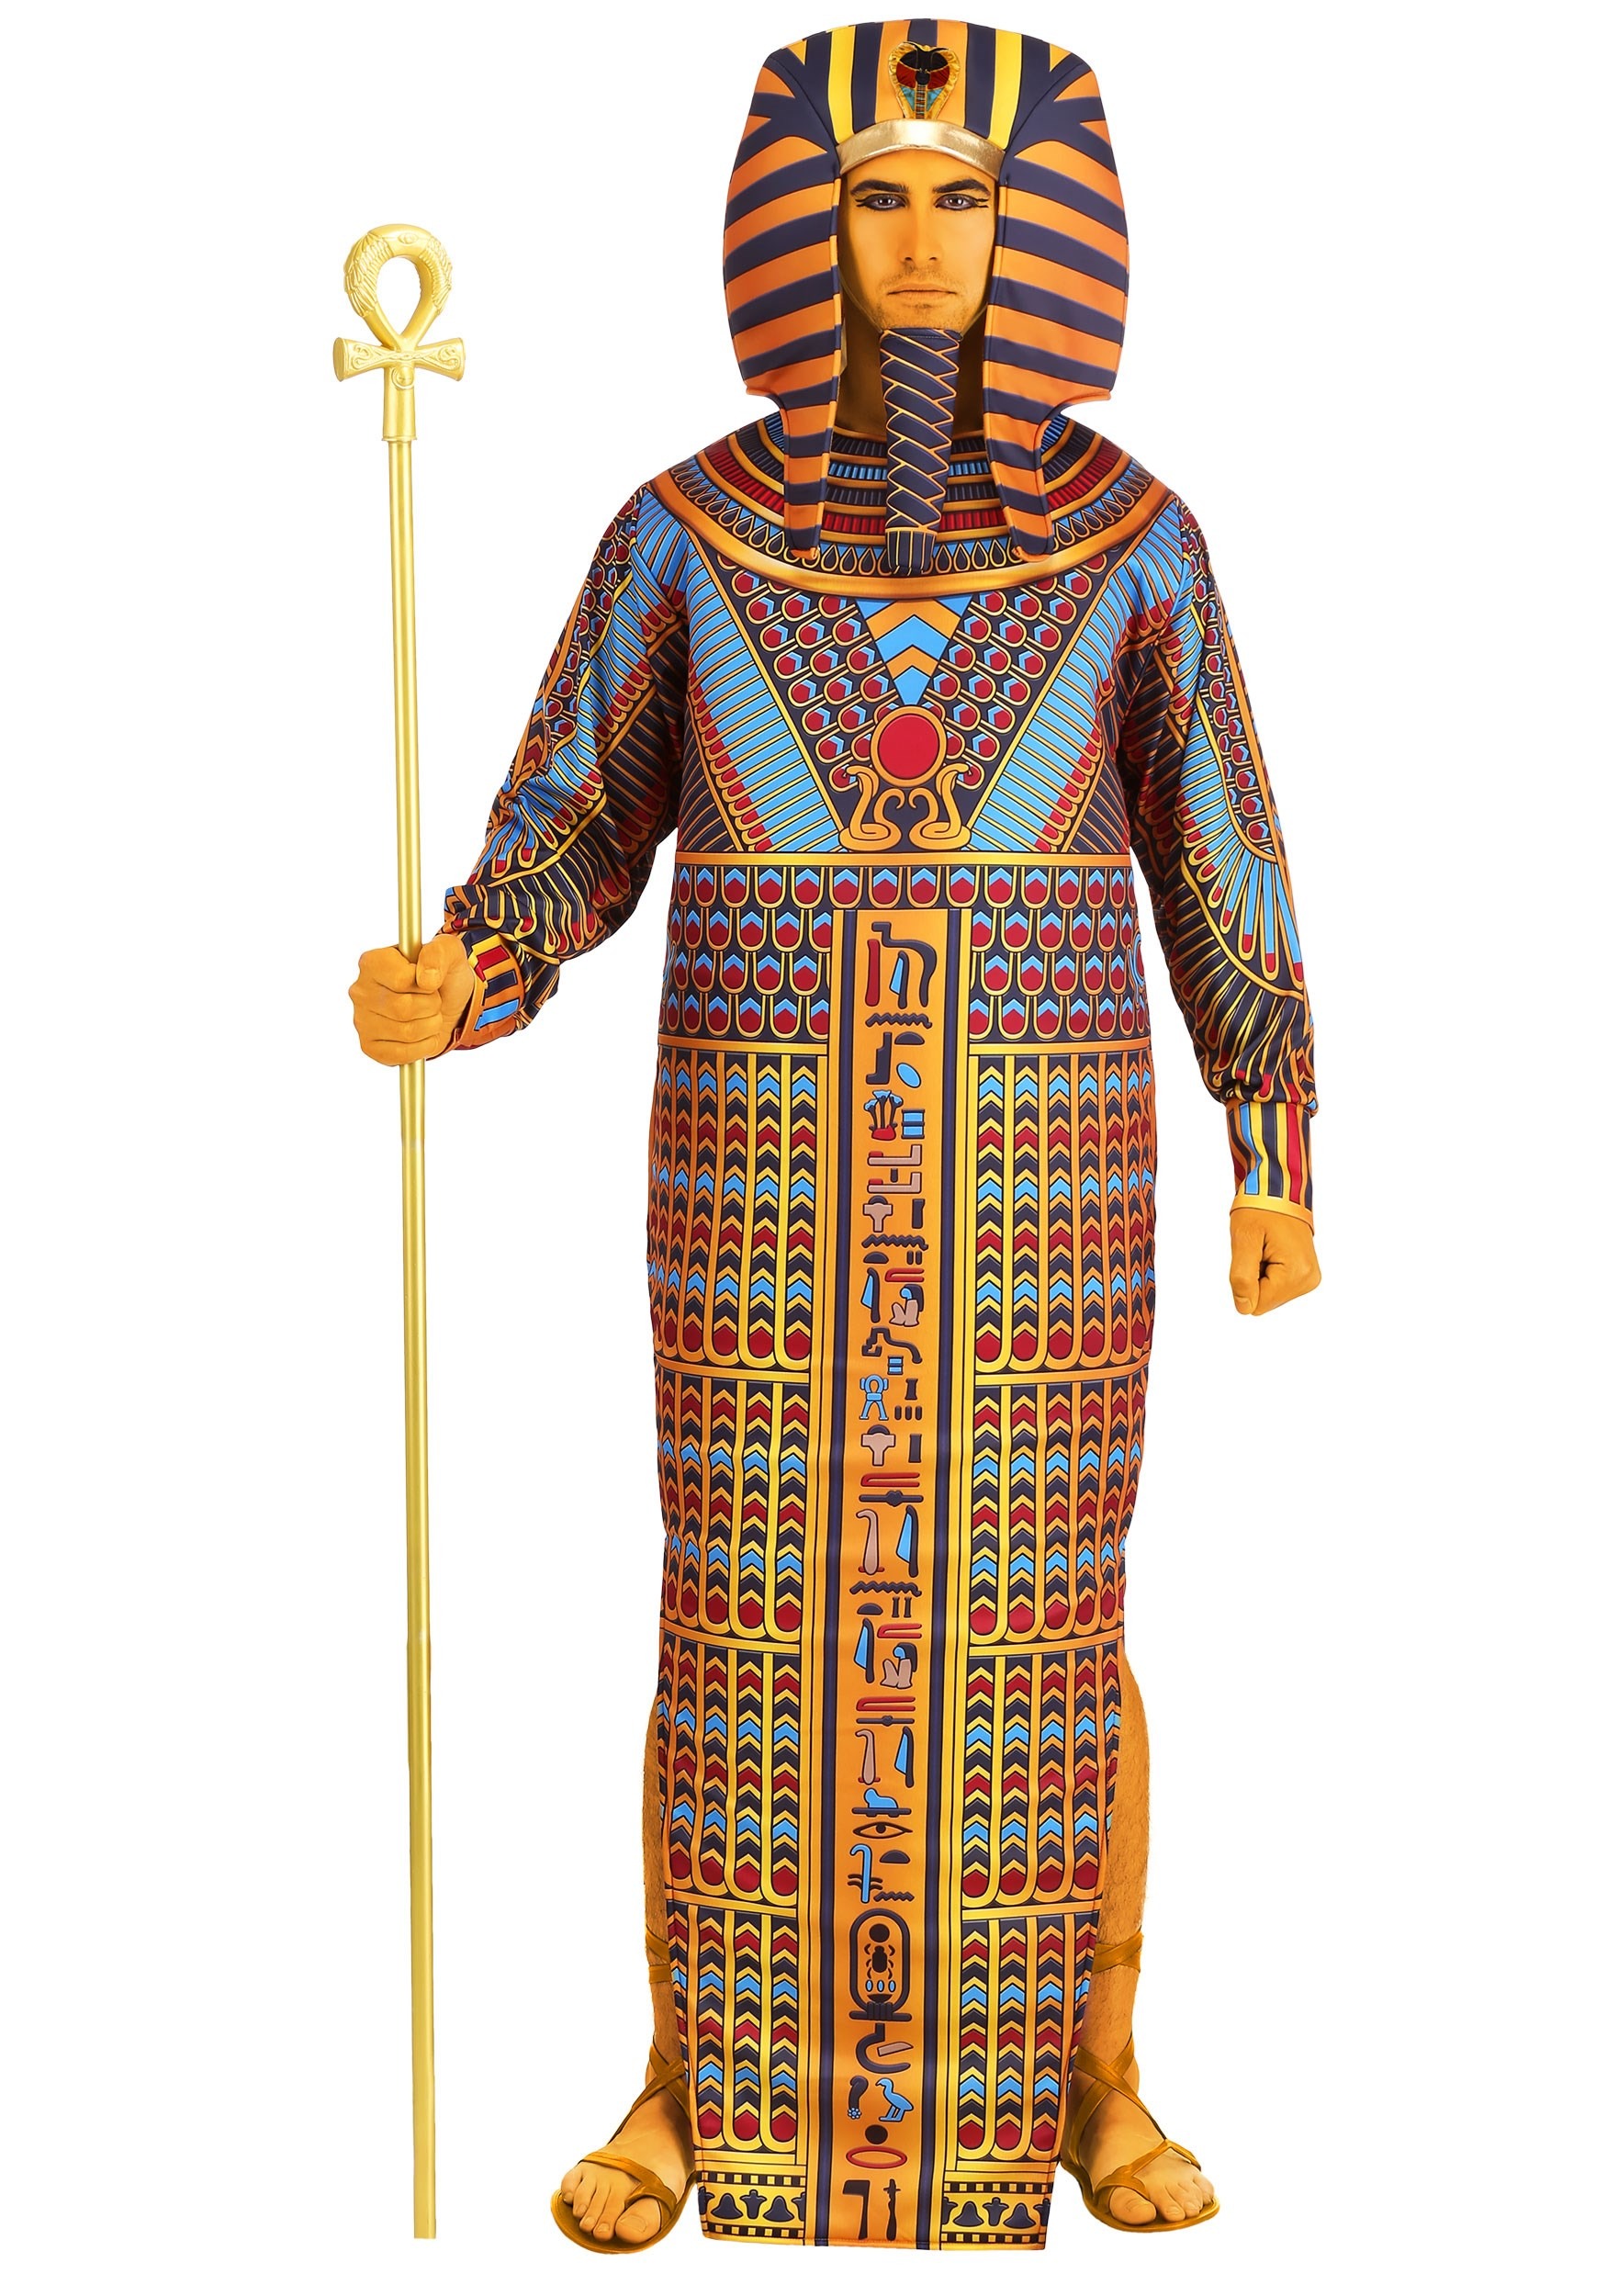 King Tut Sarcophagus Costume for Adults